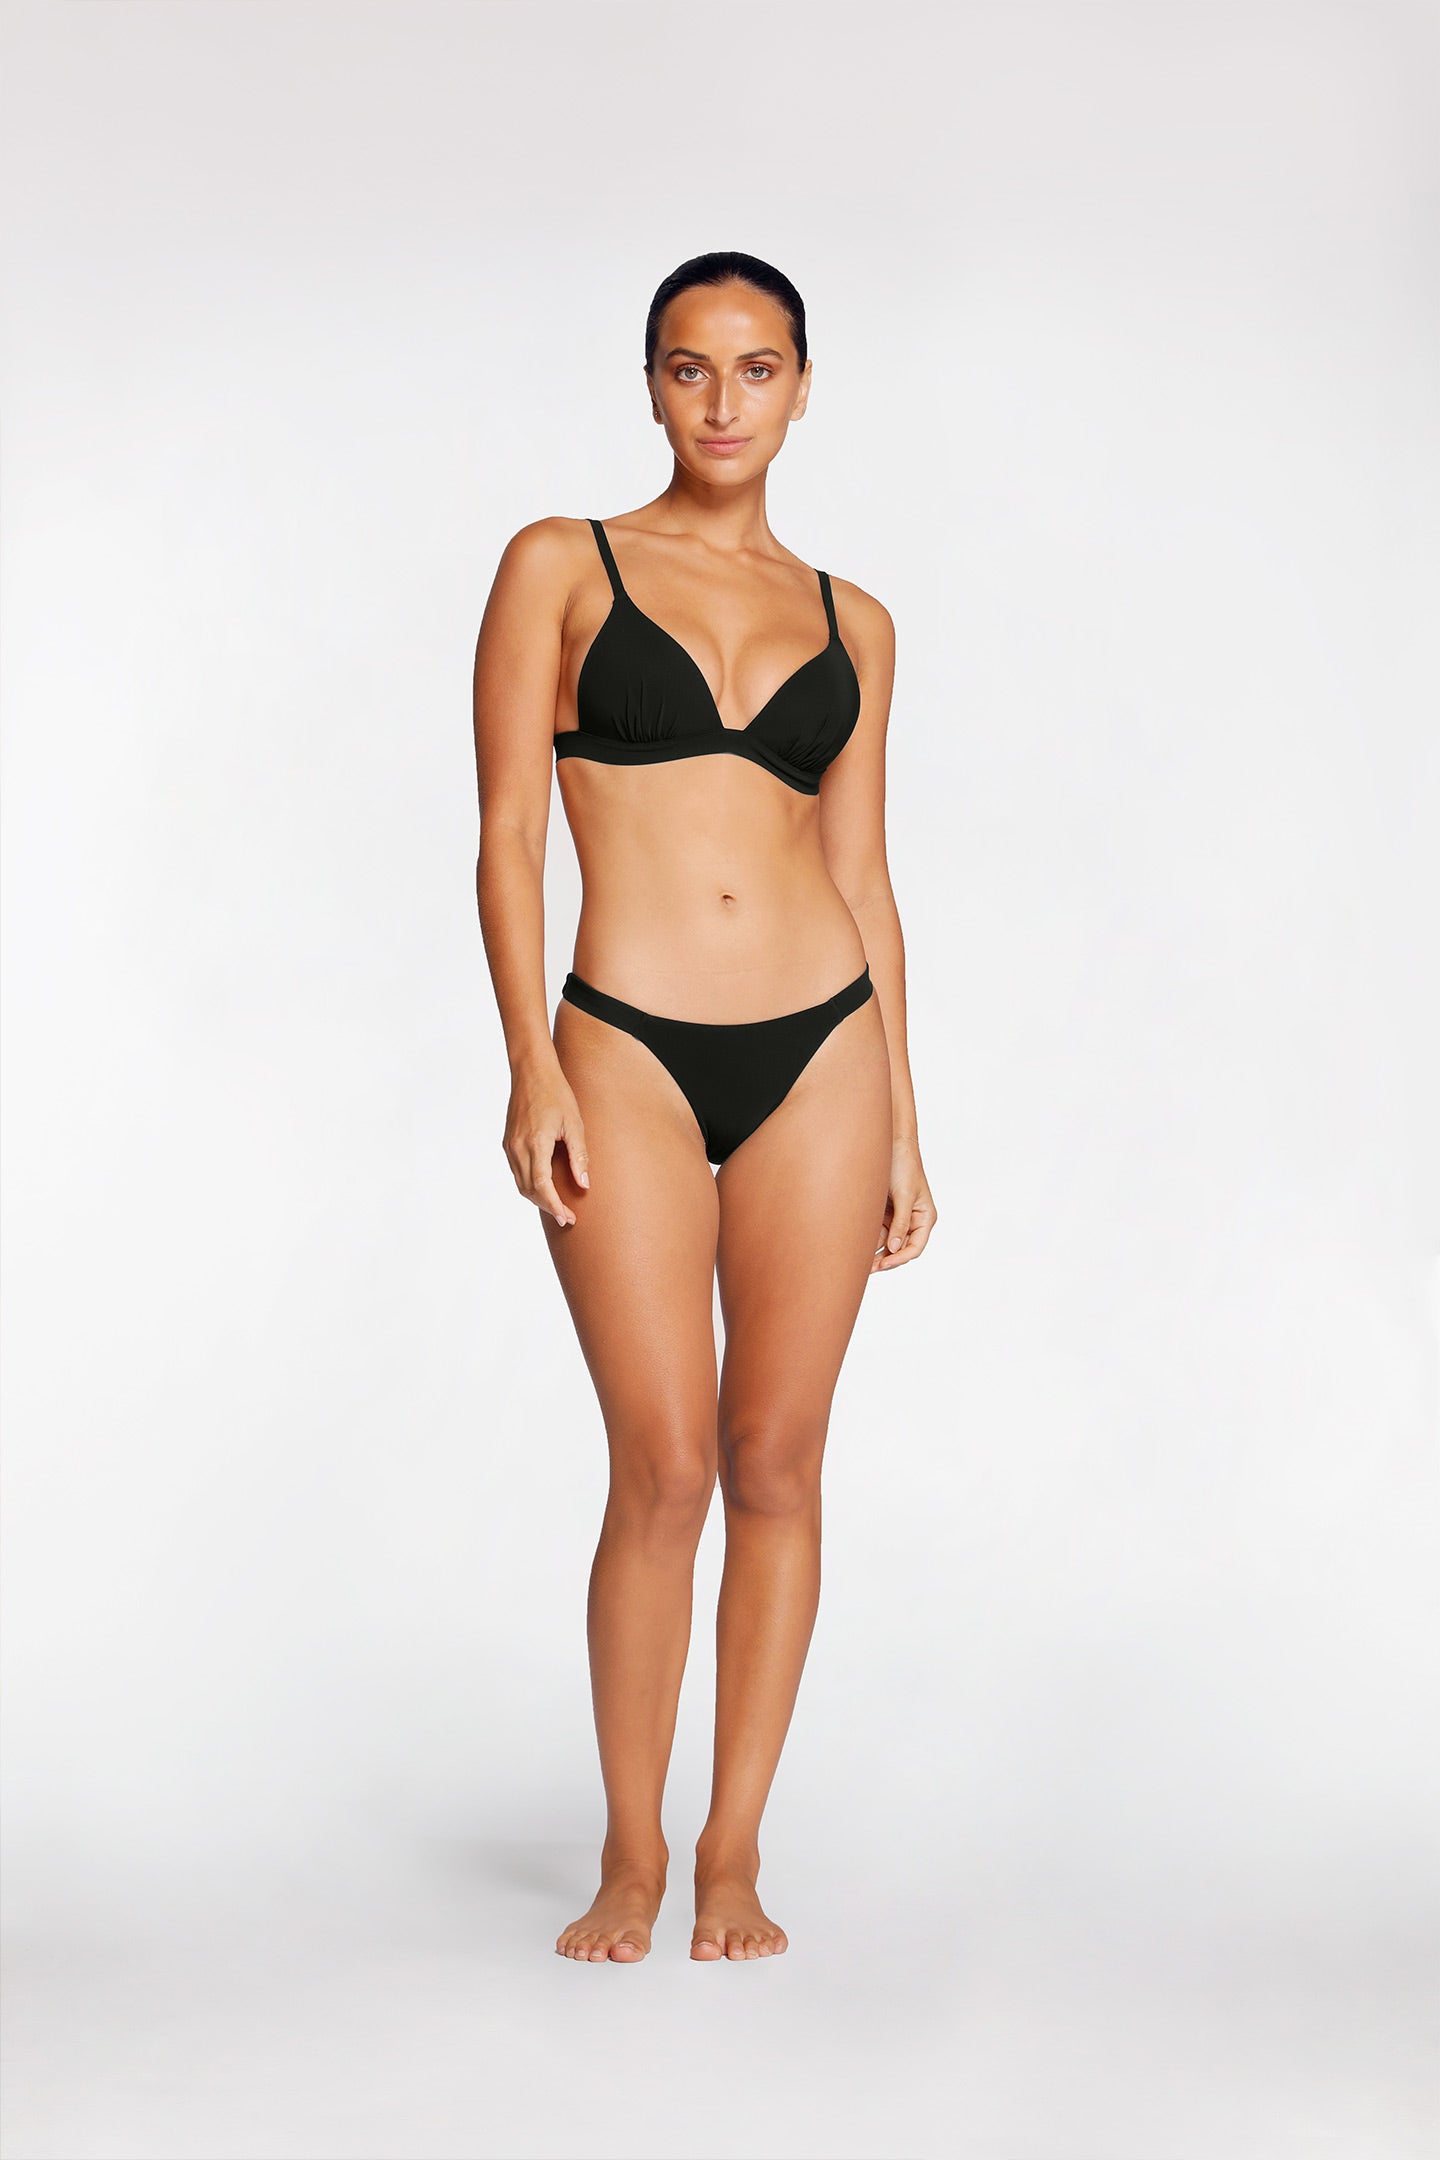 Buy RESORT TRIANGLE CONTOUR BRA online at Intimo